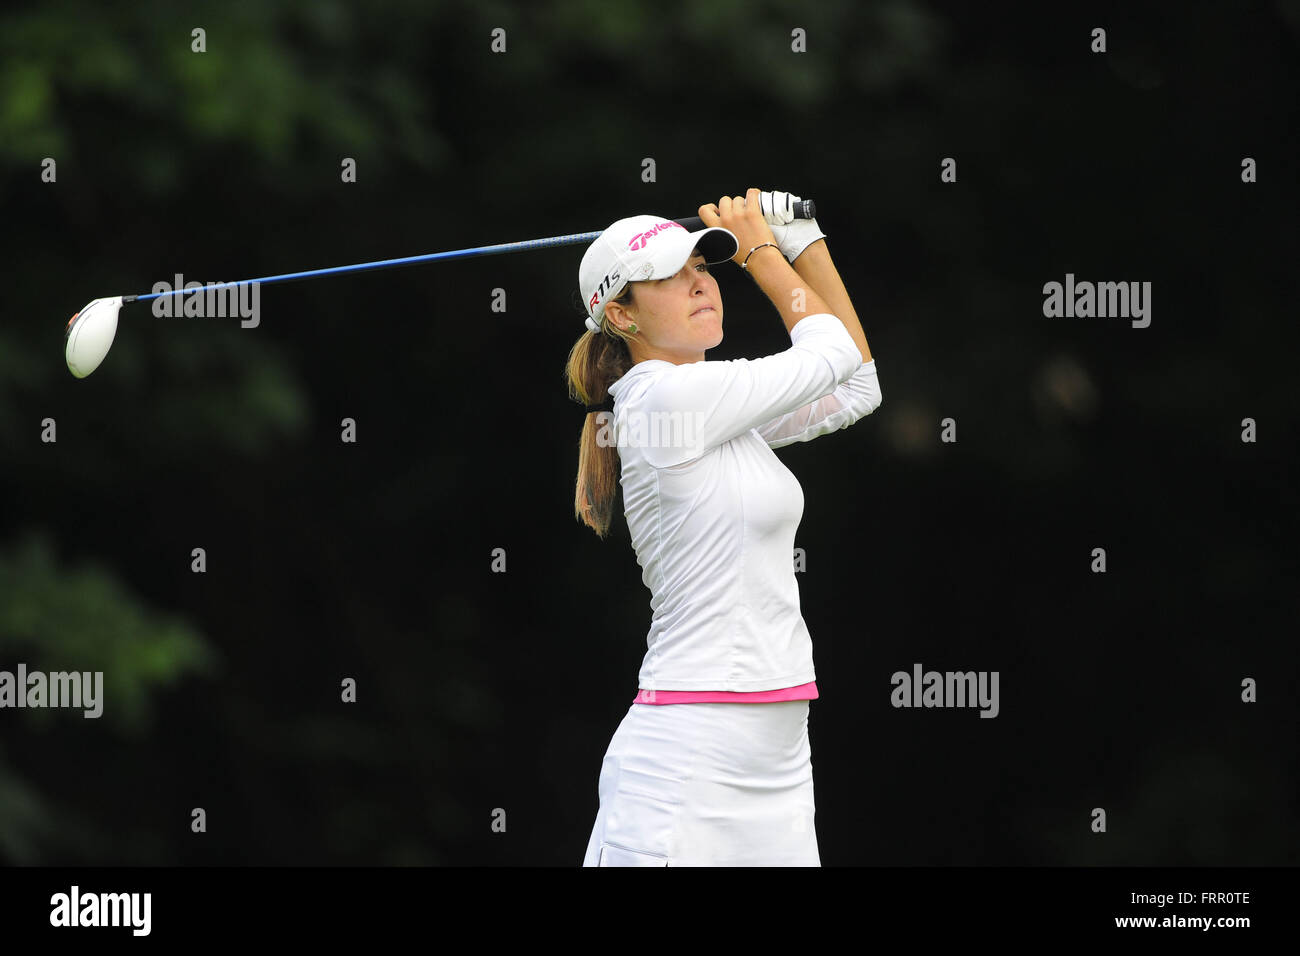 June 22, 2013 - South Bend, IN, United States - Jaye Marie Green during the Four Winds Invitational at Blackthorn Golf Club in South Bend, Indiana on June 22, 2013...ZUMA Press/Scott A. Miller (Credit Image: © Scott A. Miller via ZUMA Wire) Stock Photo